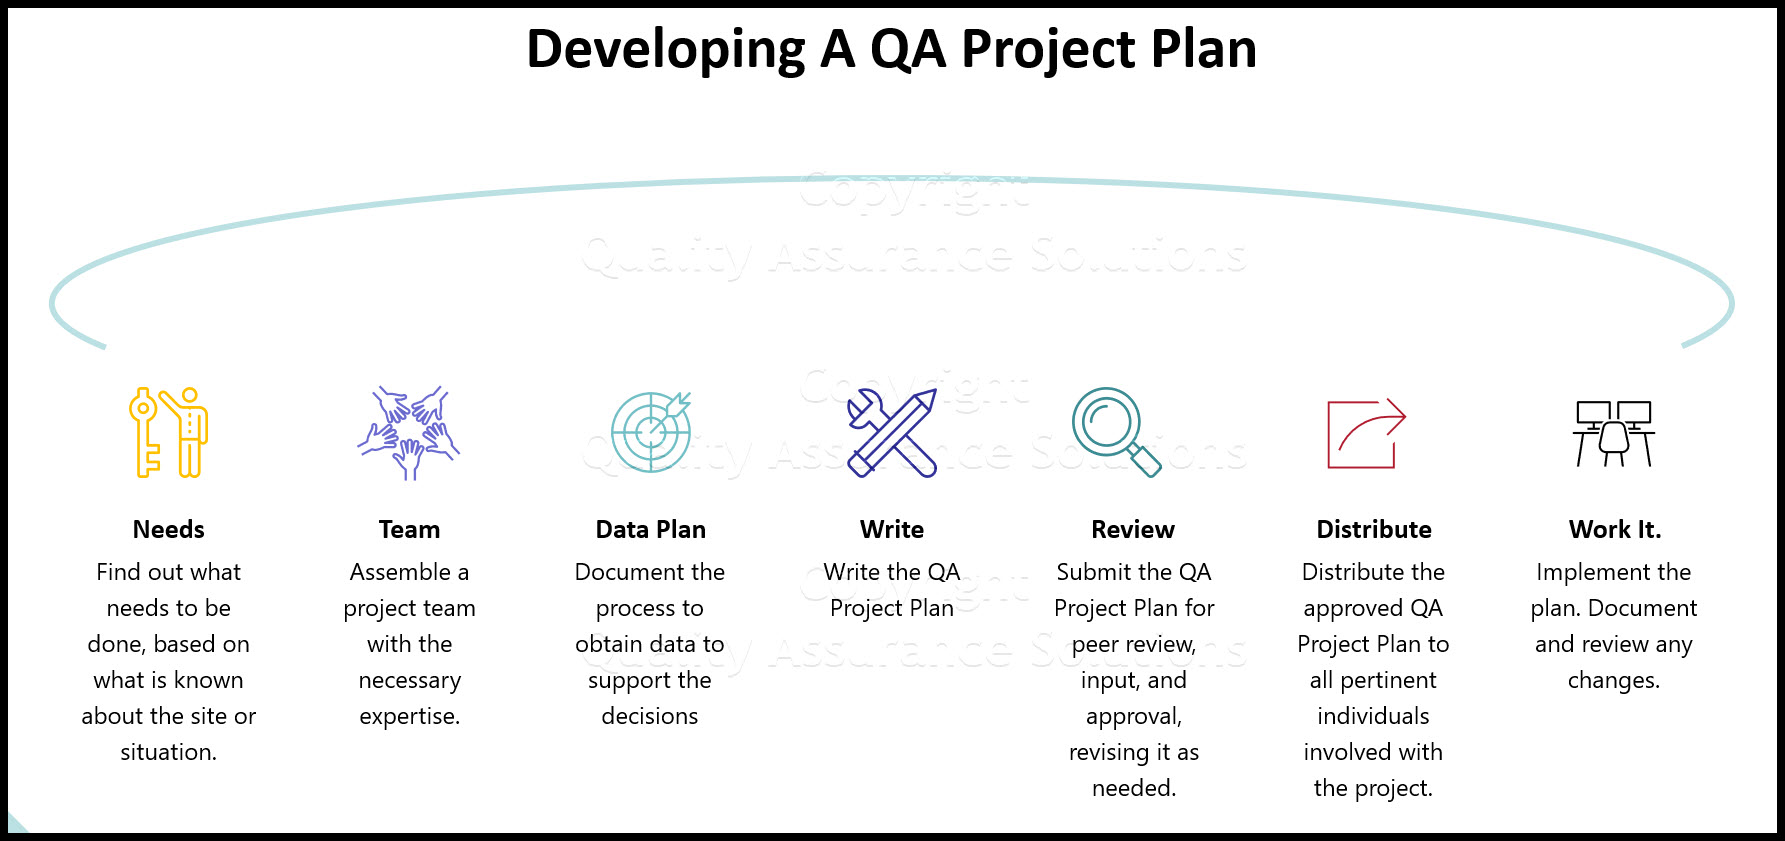 A QA Project Plan describes the necessary QA procedures, quality control(QC) activities, and other technical activities that will be implemented for a specific project or program.This article covers all the important elements to create the plan.